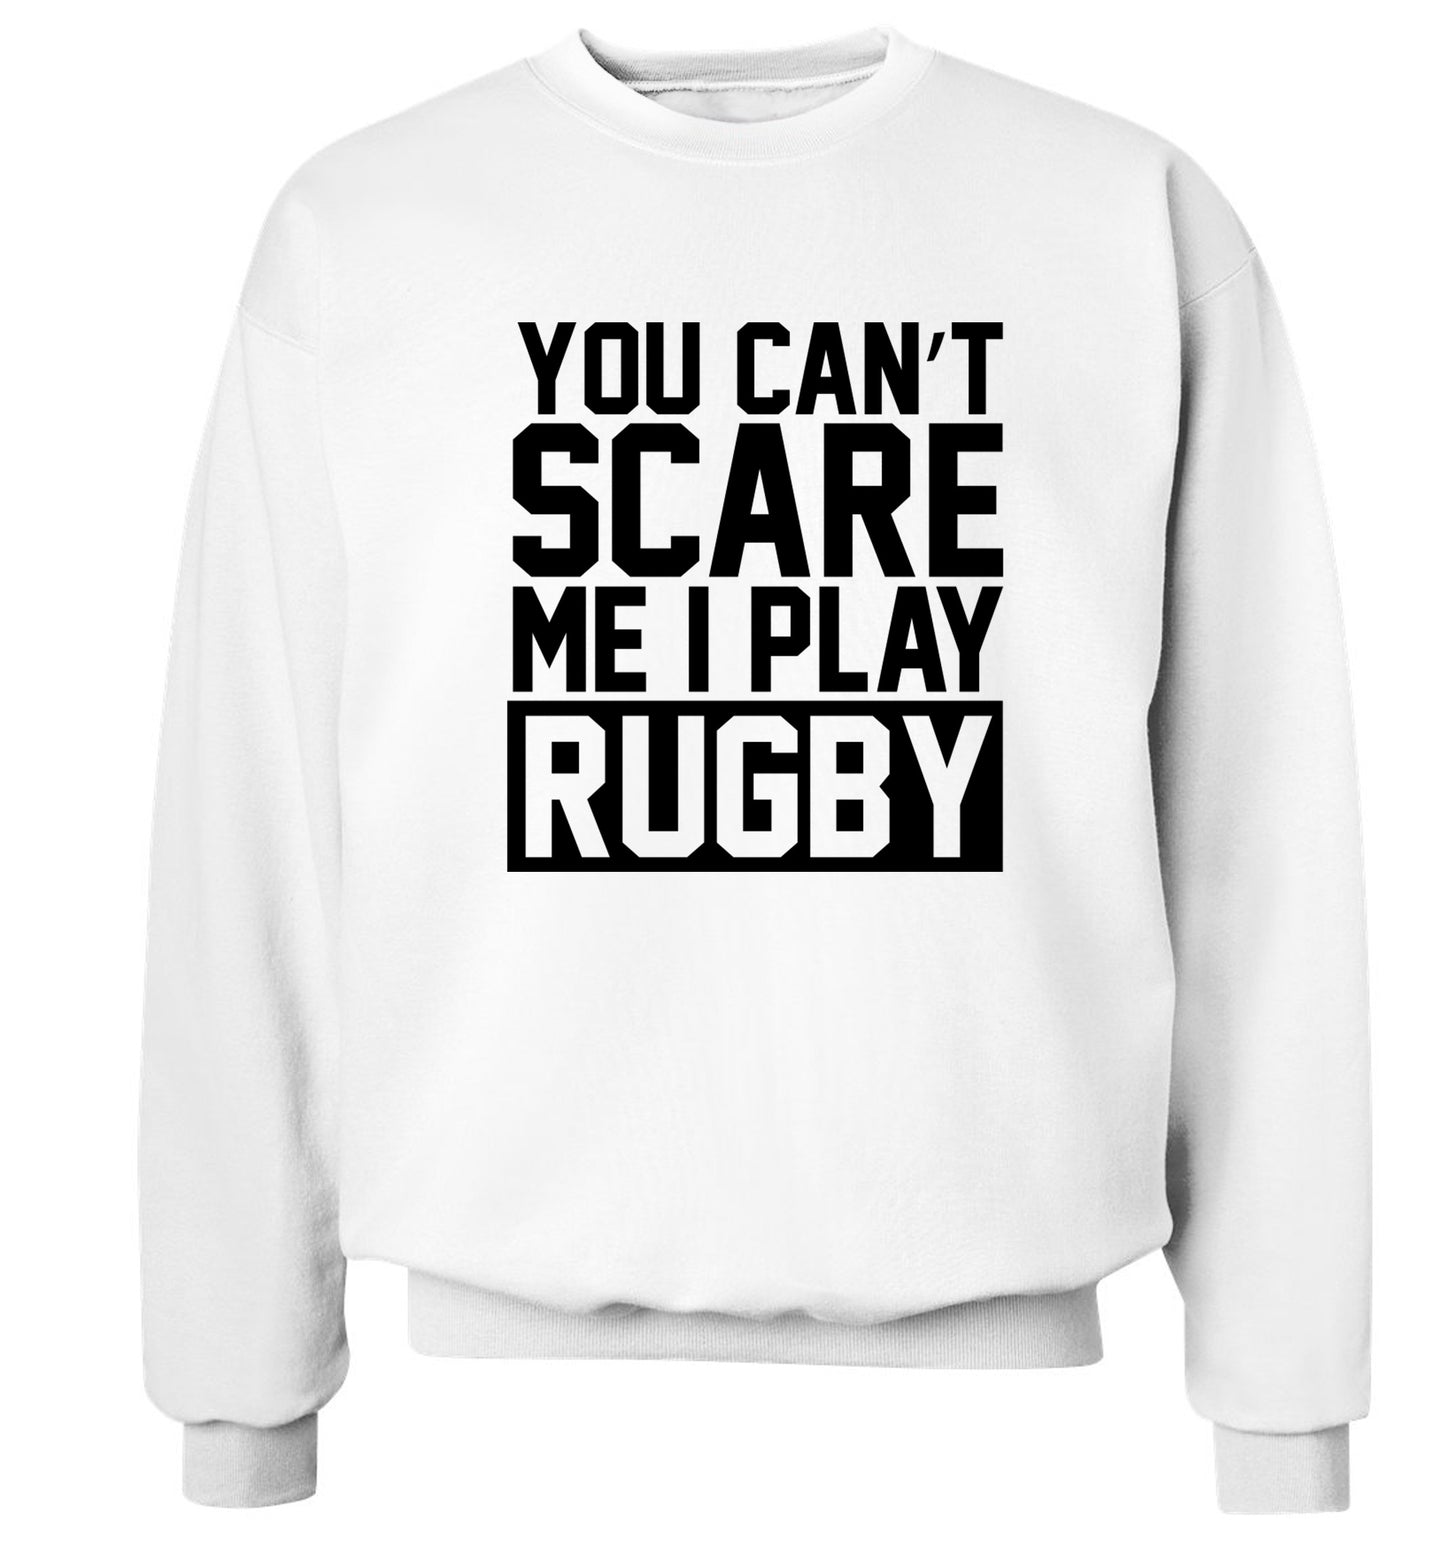 You can't scare me I play rugby Adult's unisex white Sweater 2XL